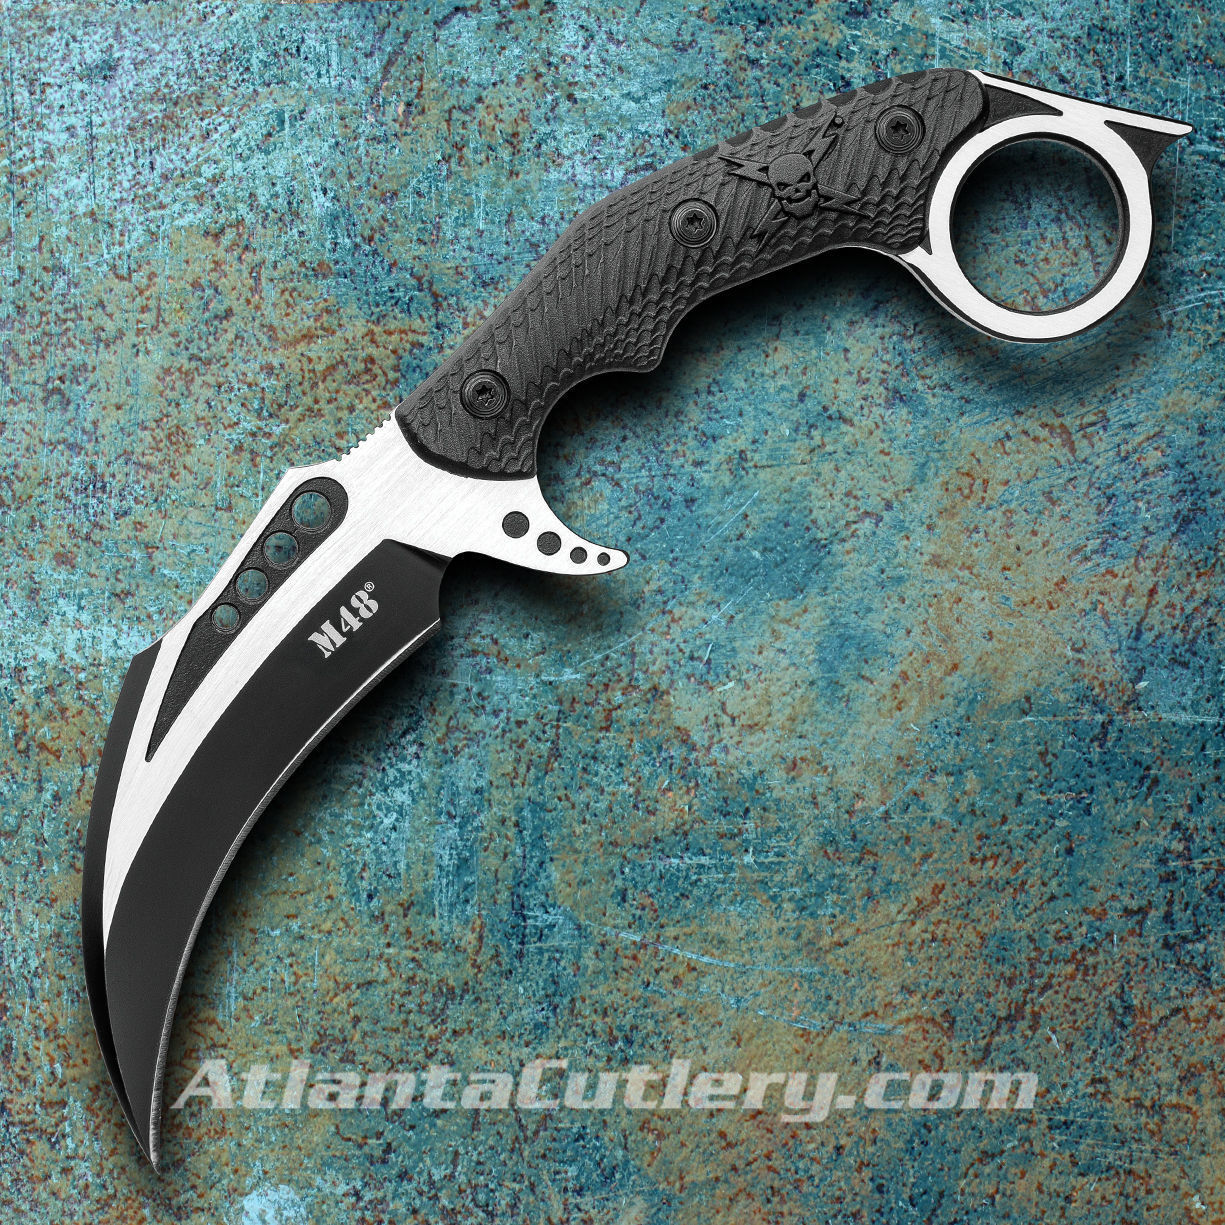 stainless steel blade on M48 Liberator Falcon Karambit has black oxide coating, satin finish accents, weight-reducing holes